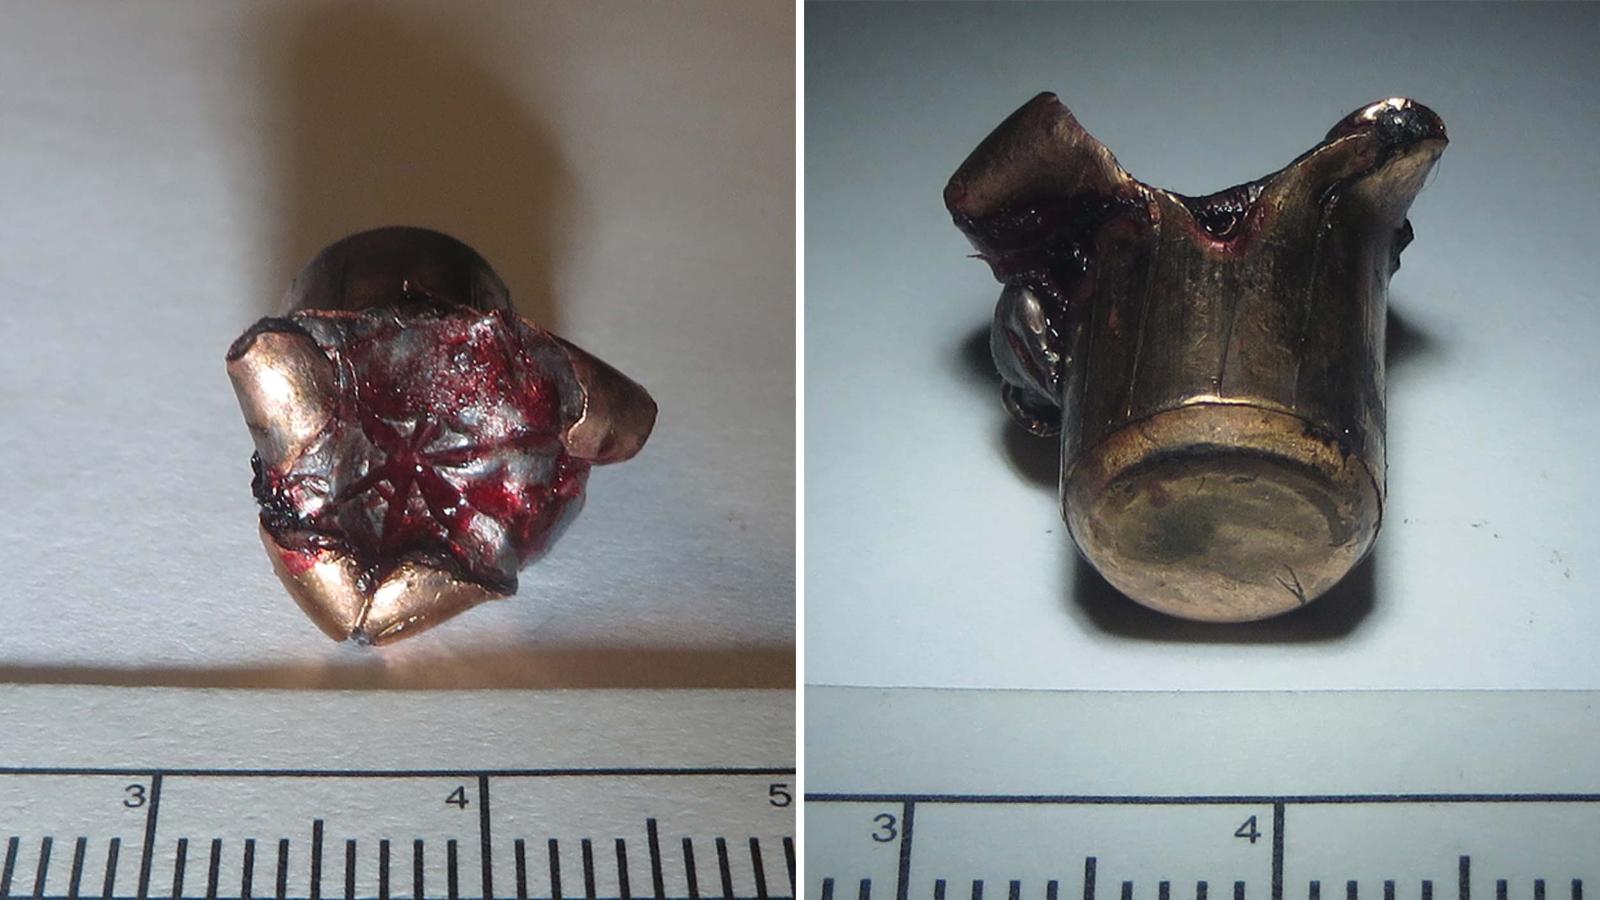 This 9 mm bullet allegedly tore through the left knee of Vincent Sheperis, a SWAT officer in Stamford, Connecticut. His P320 fired when he dropped it, he claims.